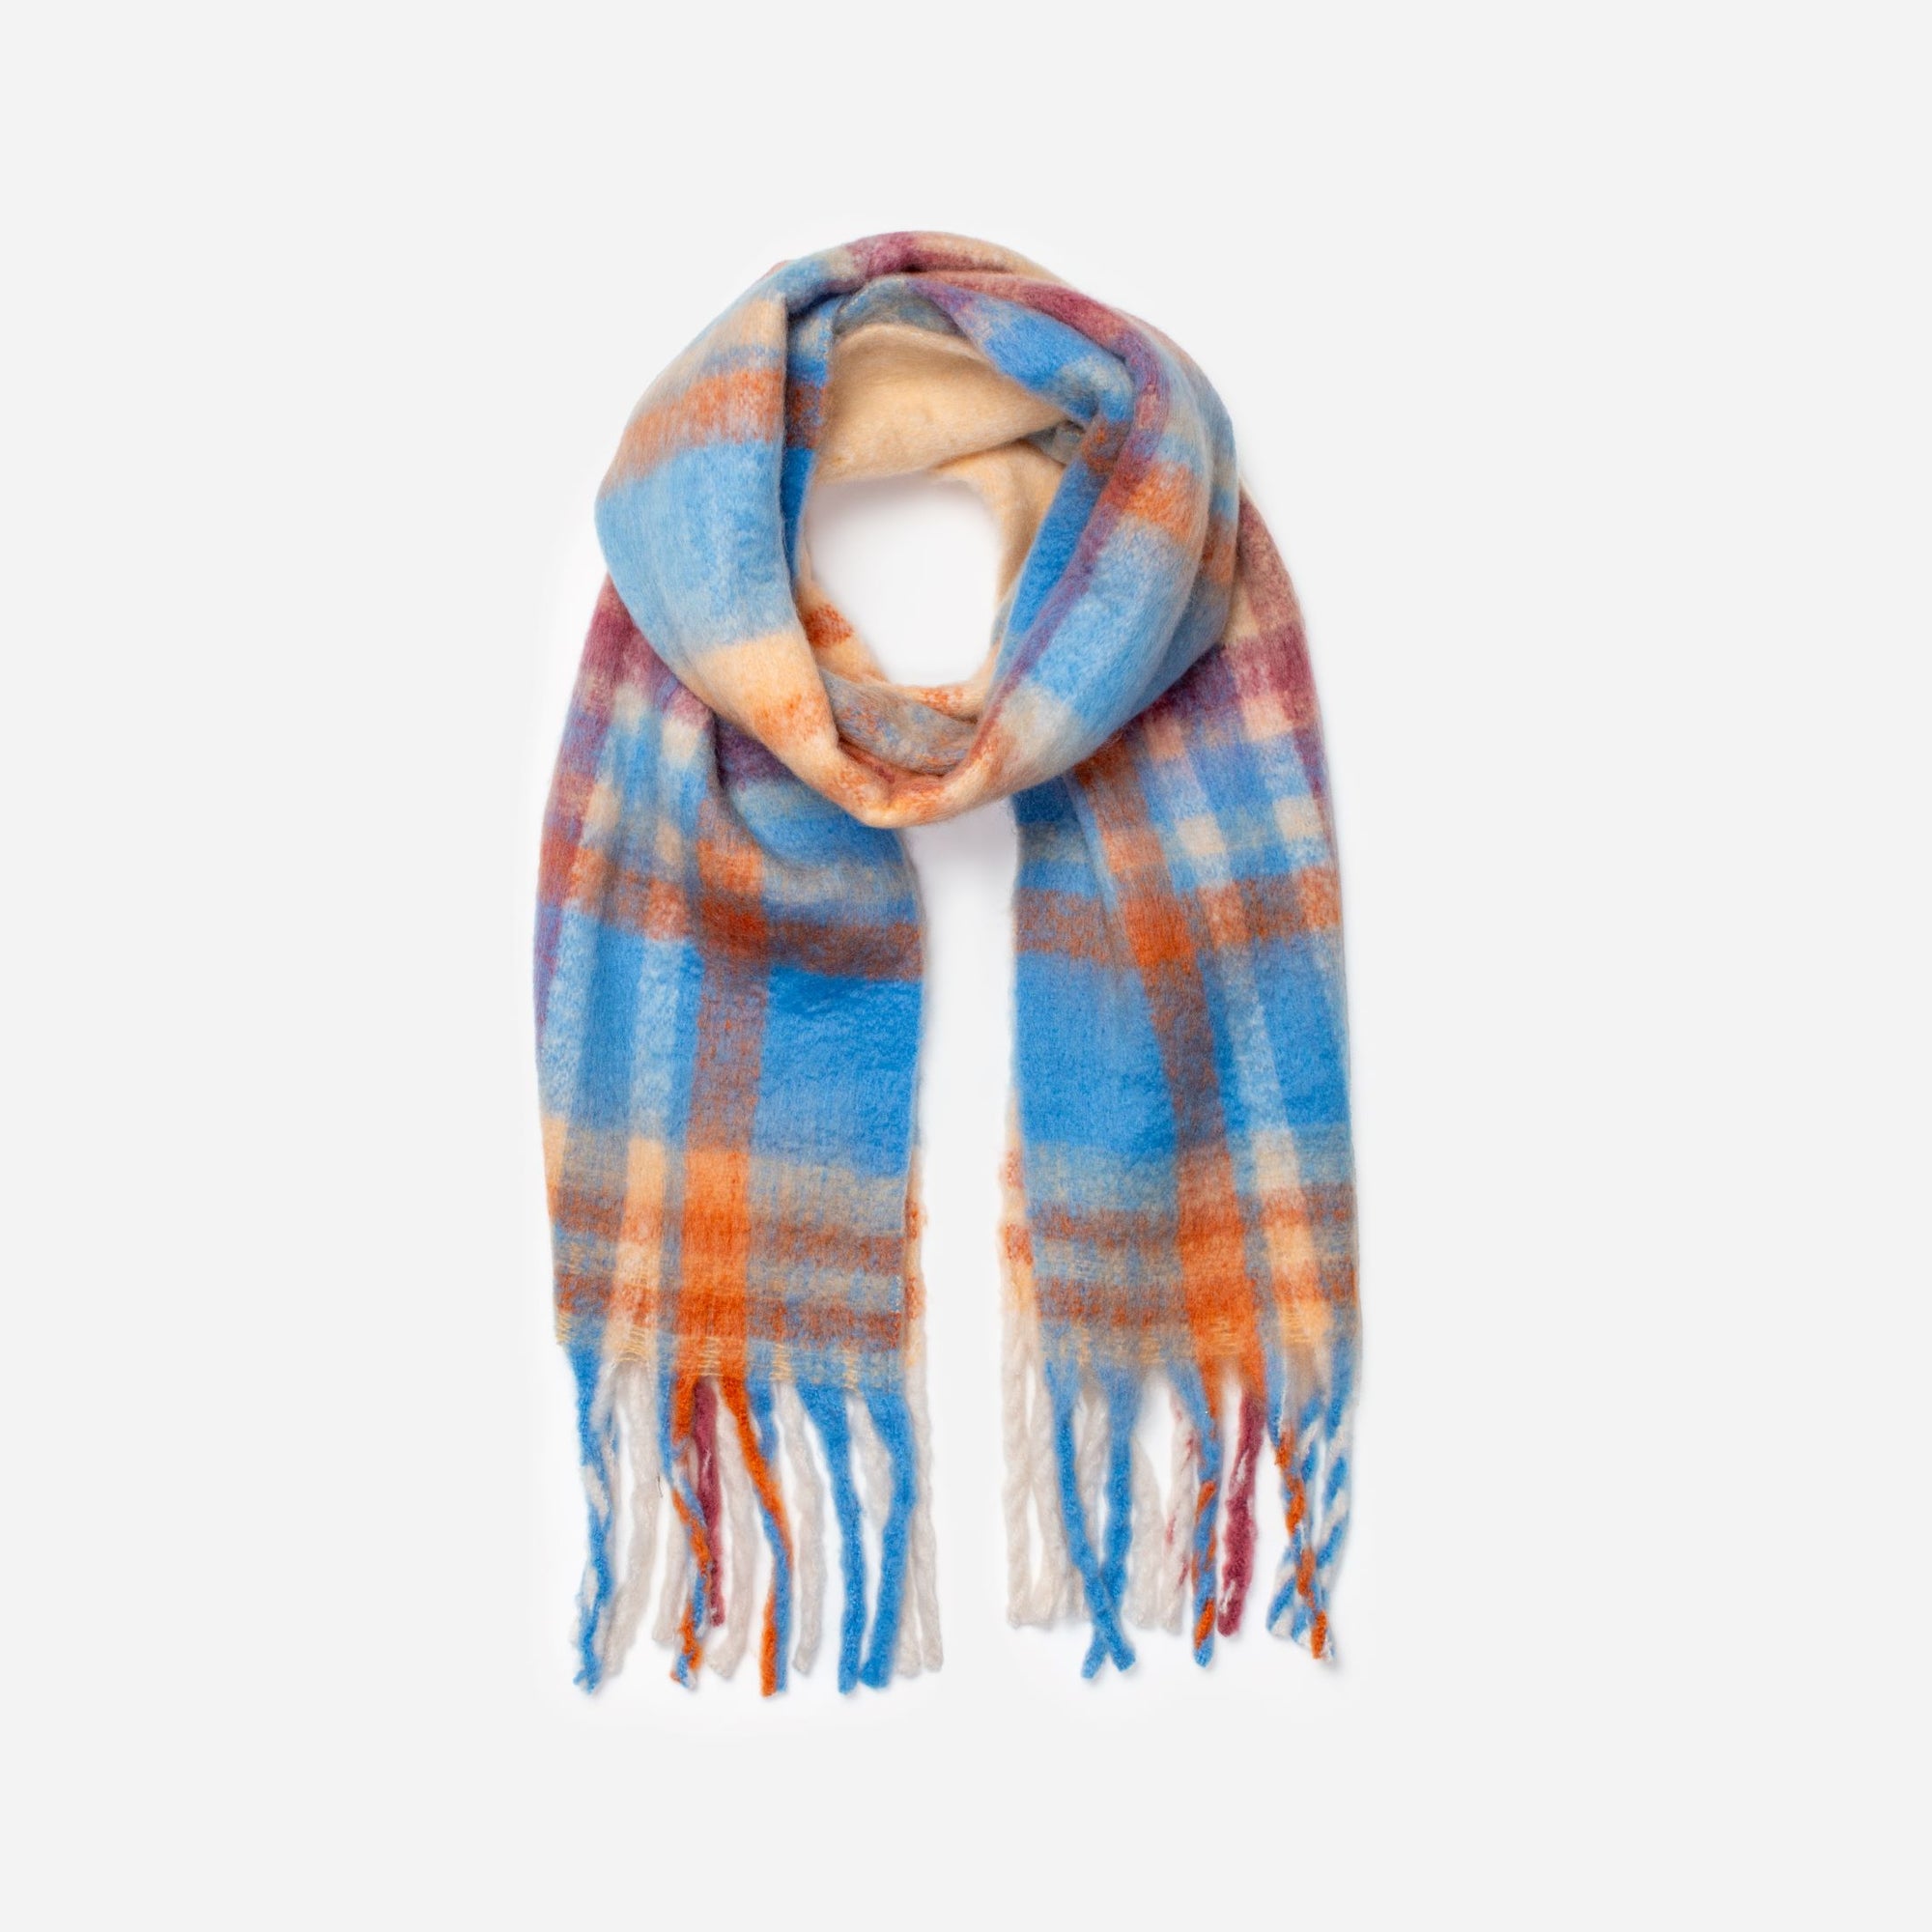 Blue scarf with orange and red checks